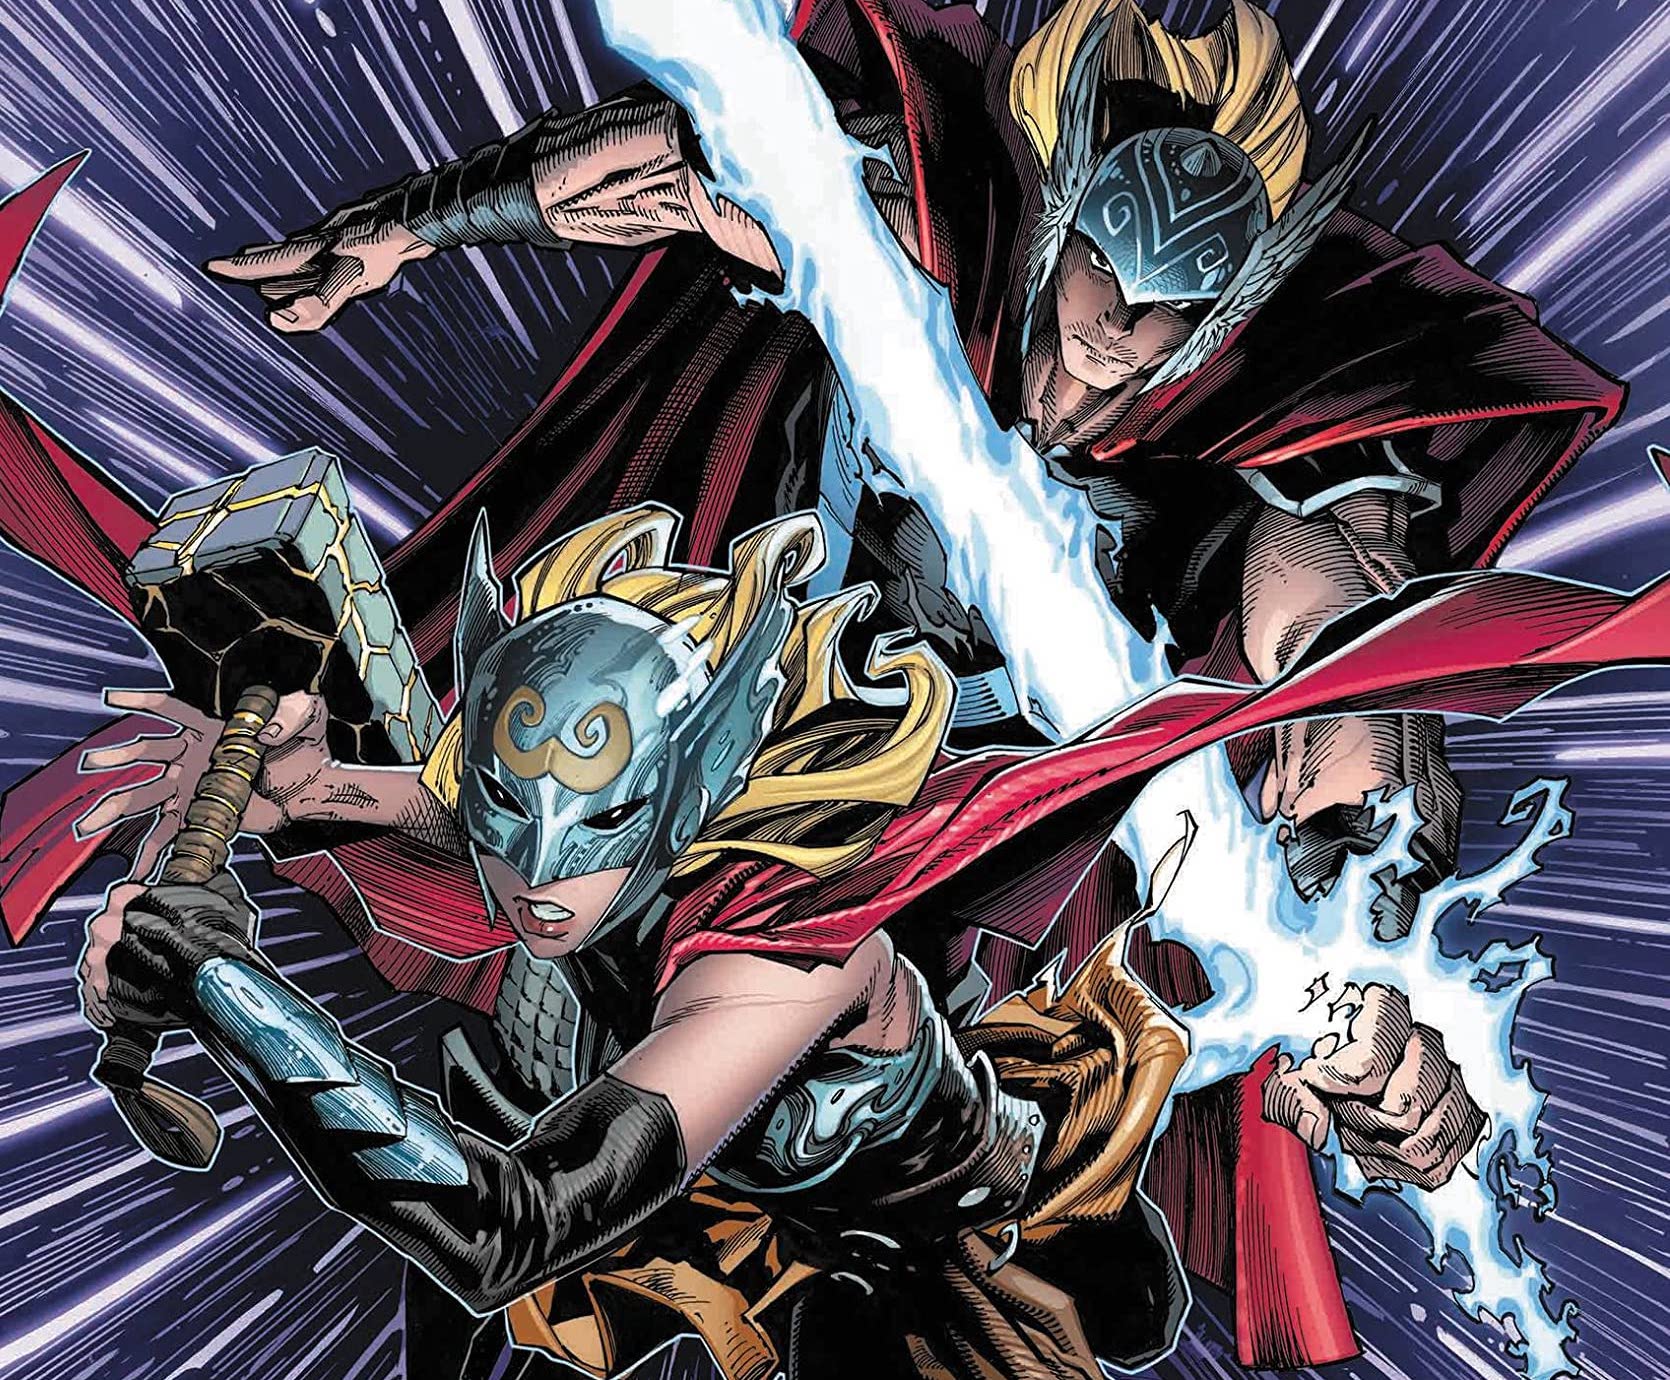 Jane Foster and the Mighty Thor